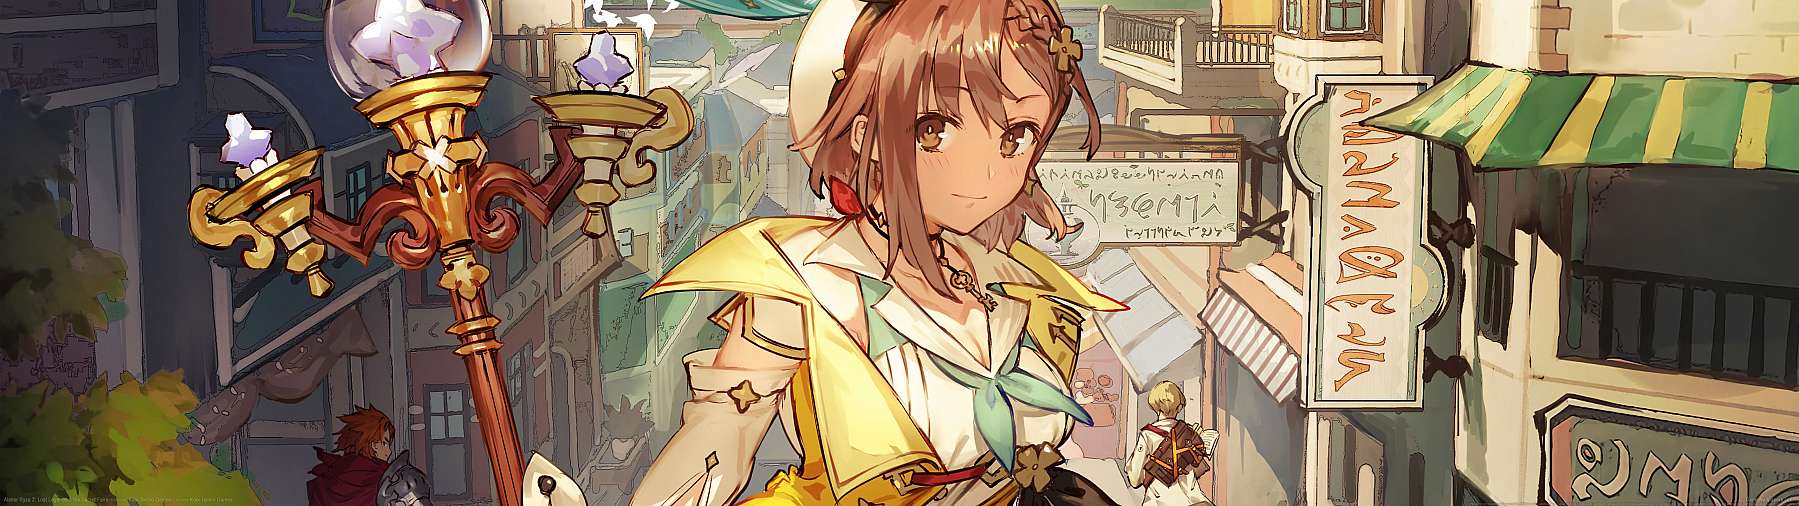 Atelier Ryza 2: Lost Legends & the Secret Fairy superwide wallpaper or background 01